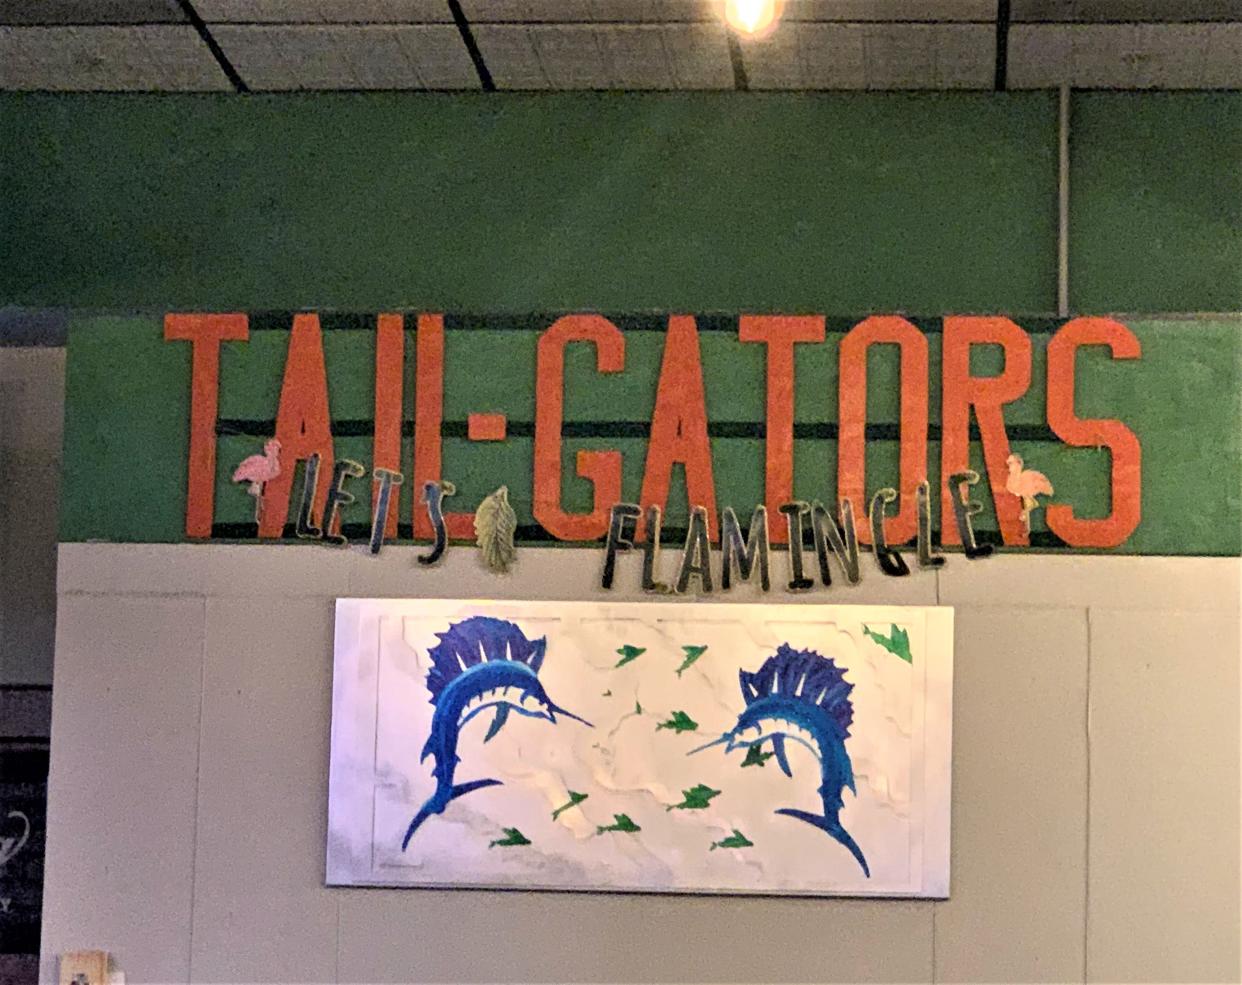 Tail Gators is a Florida-style family-friendly sports bar encircled with 25 wall-to-wall flat-screen televisions, sports team flags, banners, and colorful fish art.